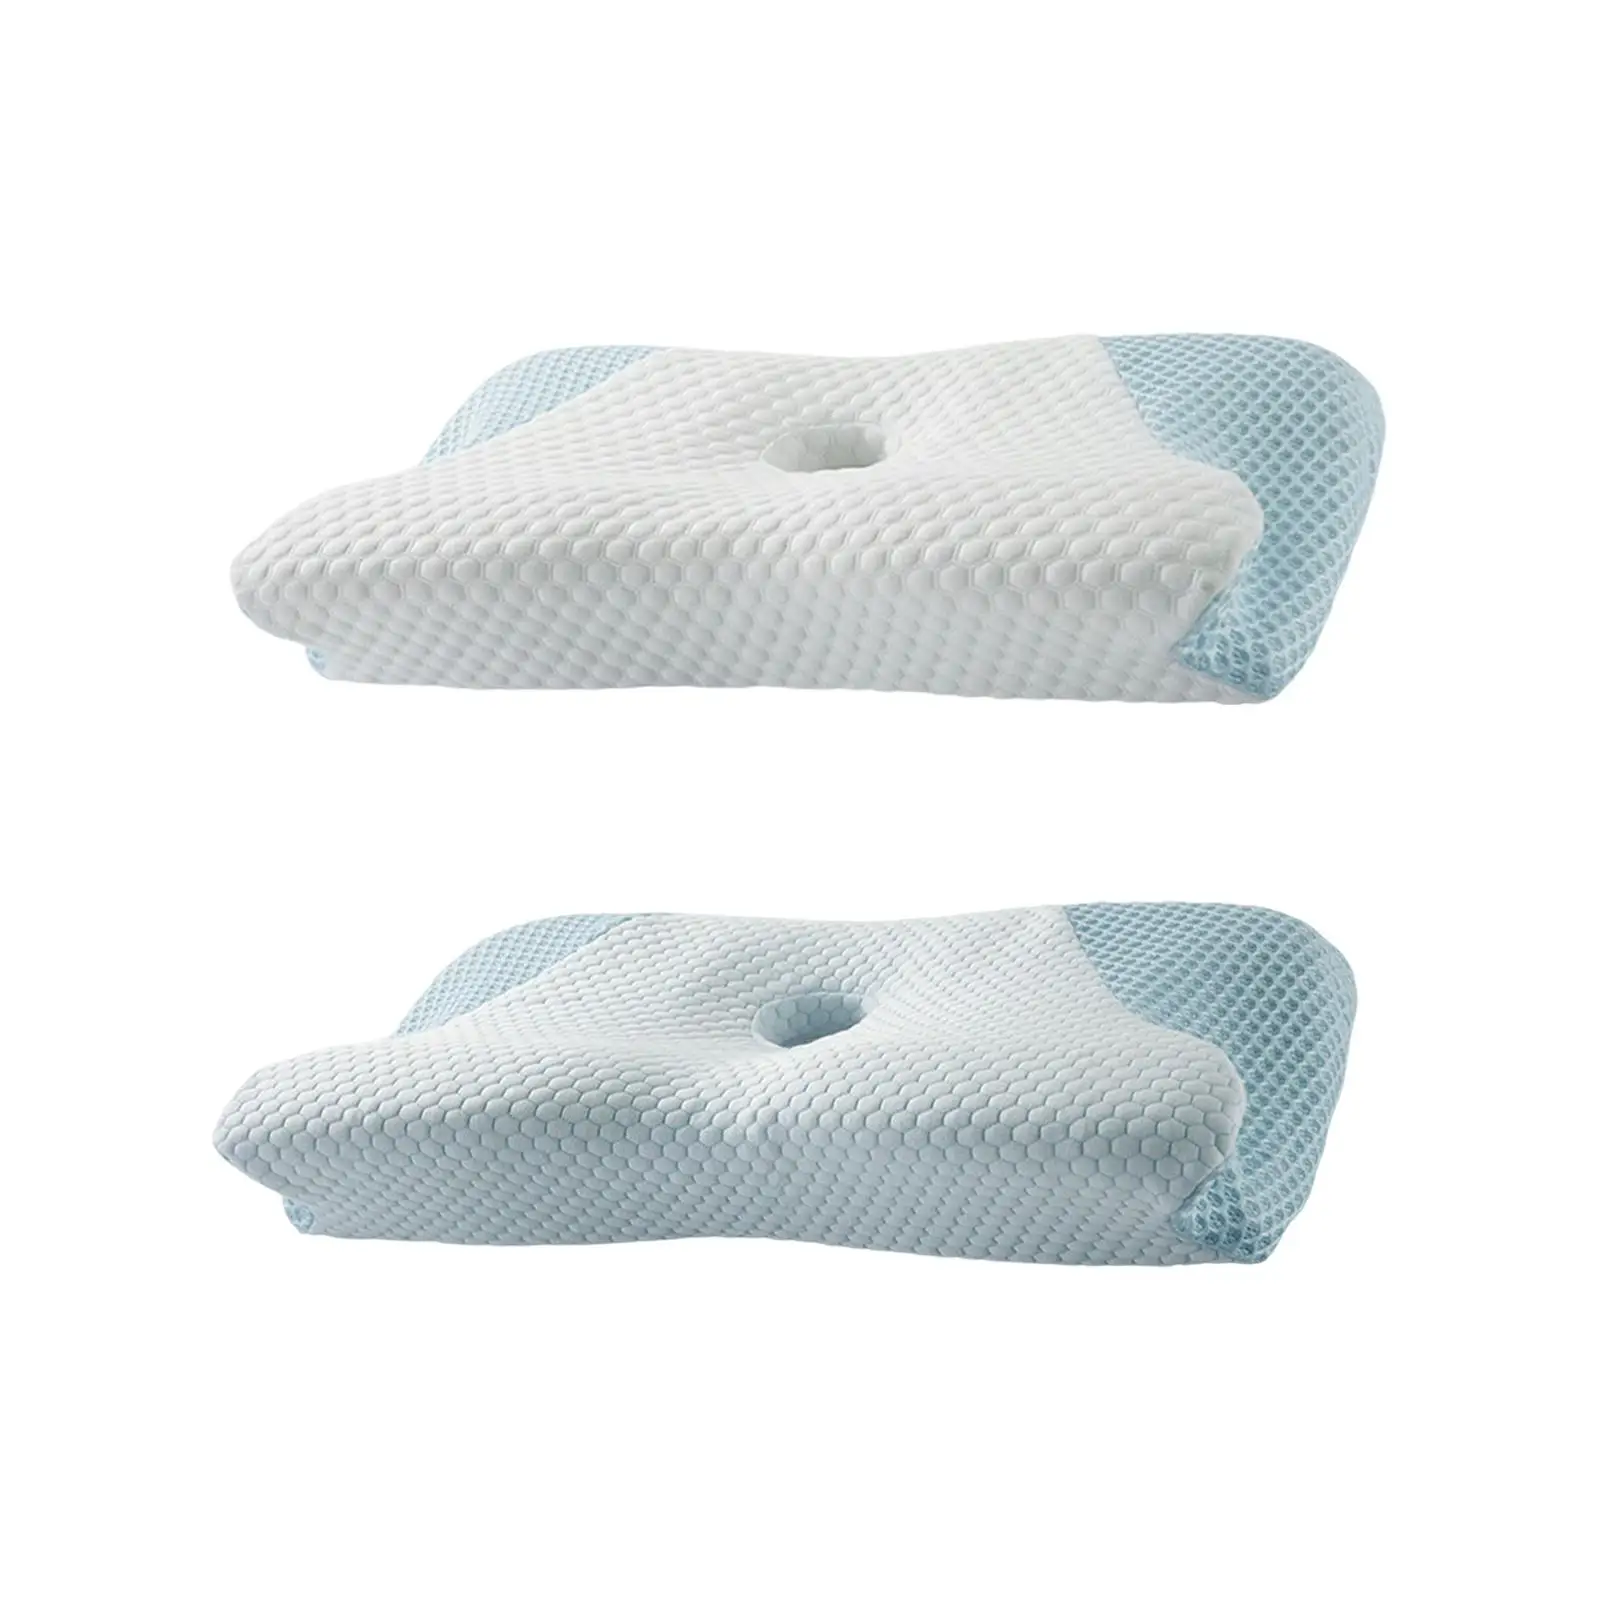 Sleeping Pillow Latex Pillow Side Pillow Comfortable for Sleeping Neck Gifts